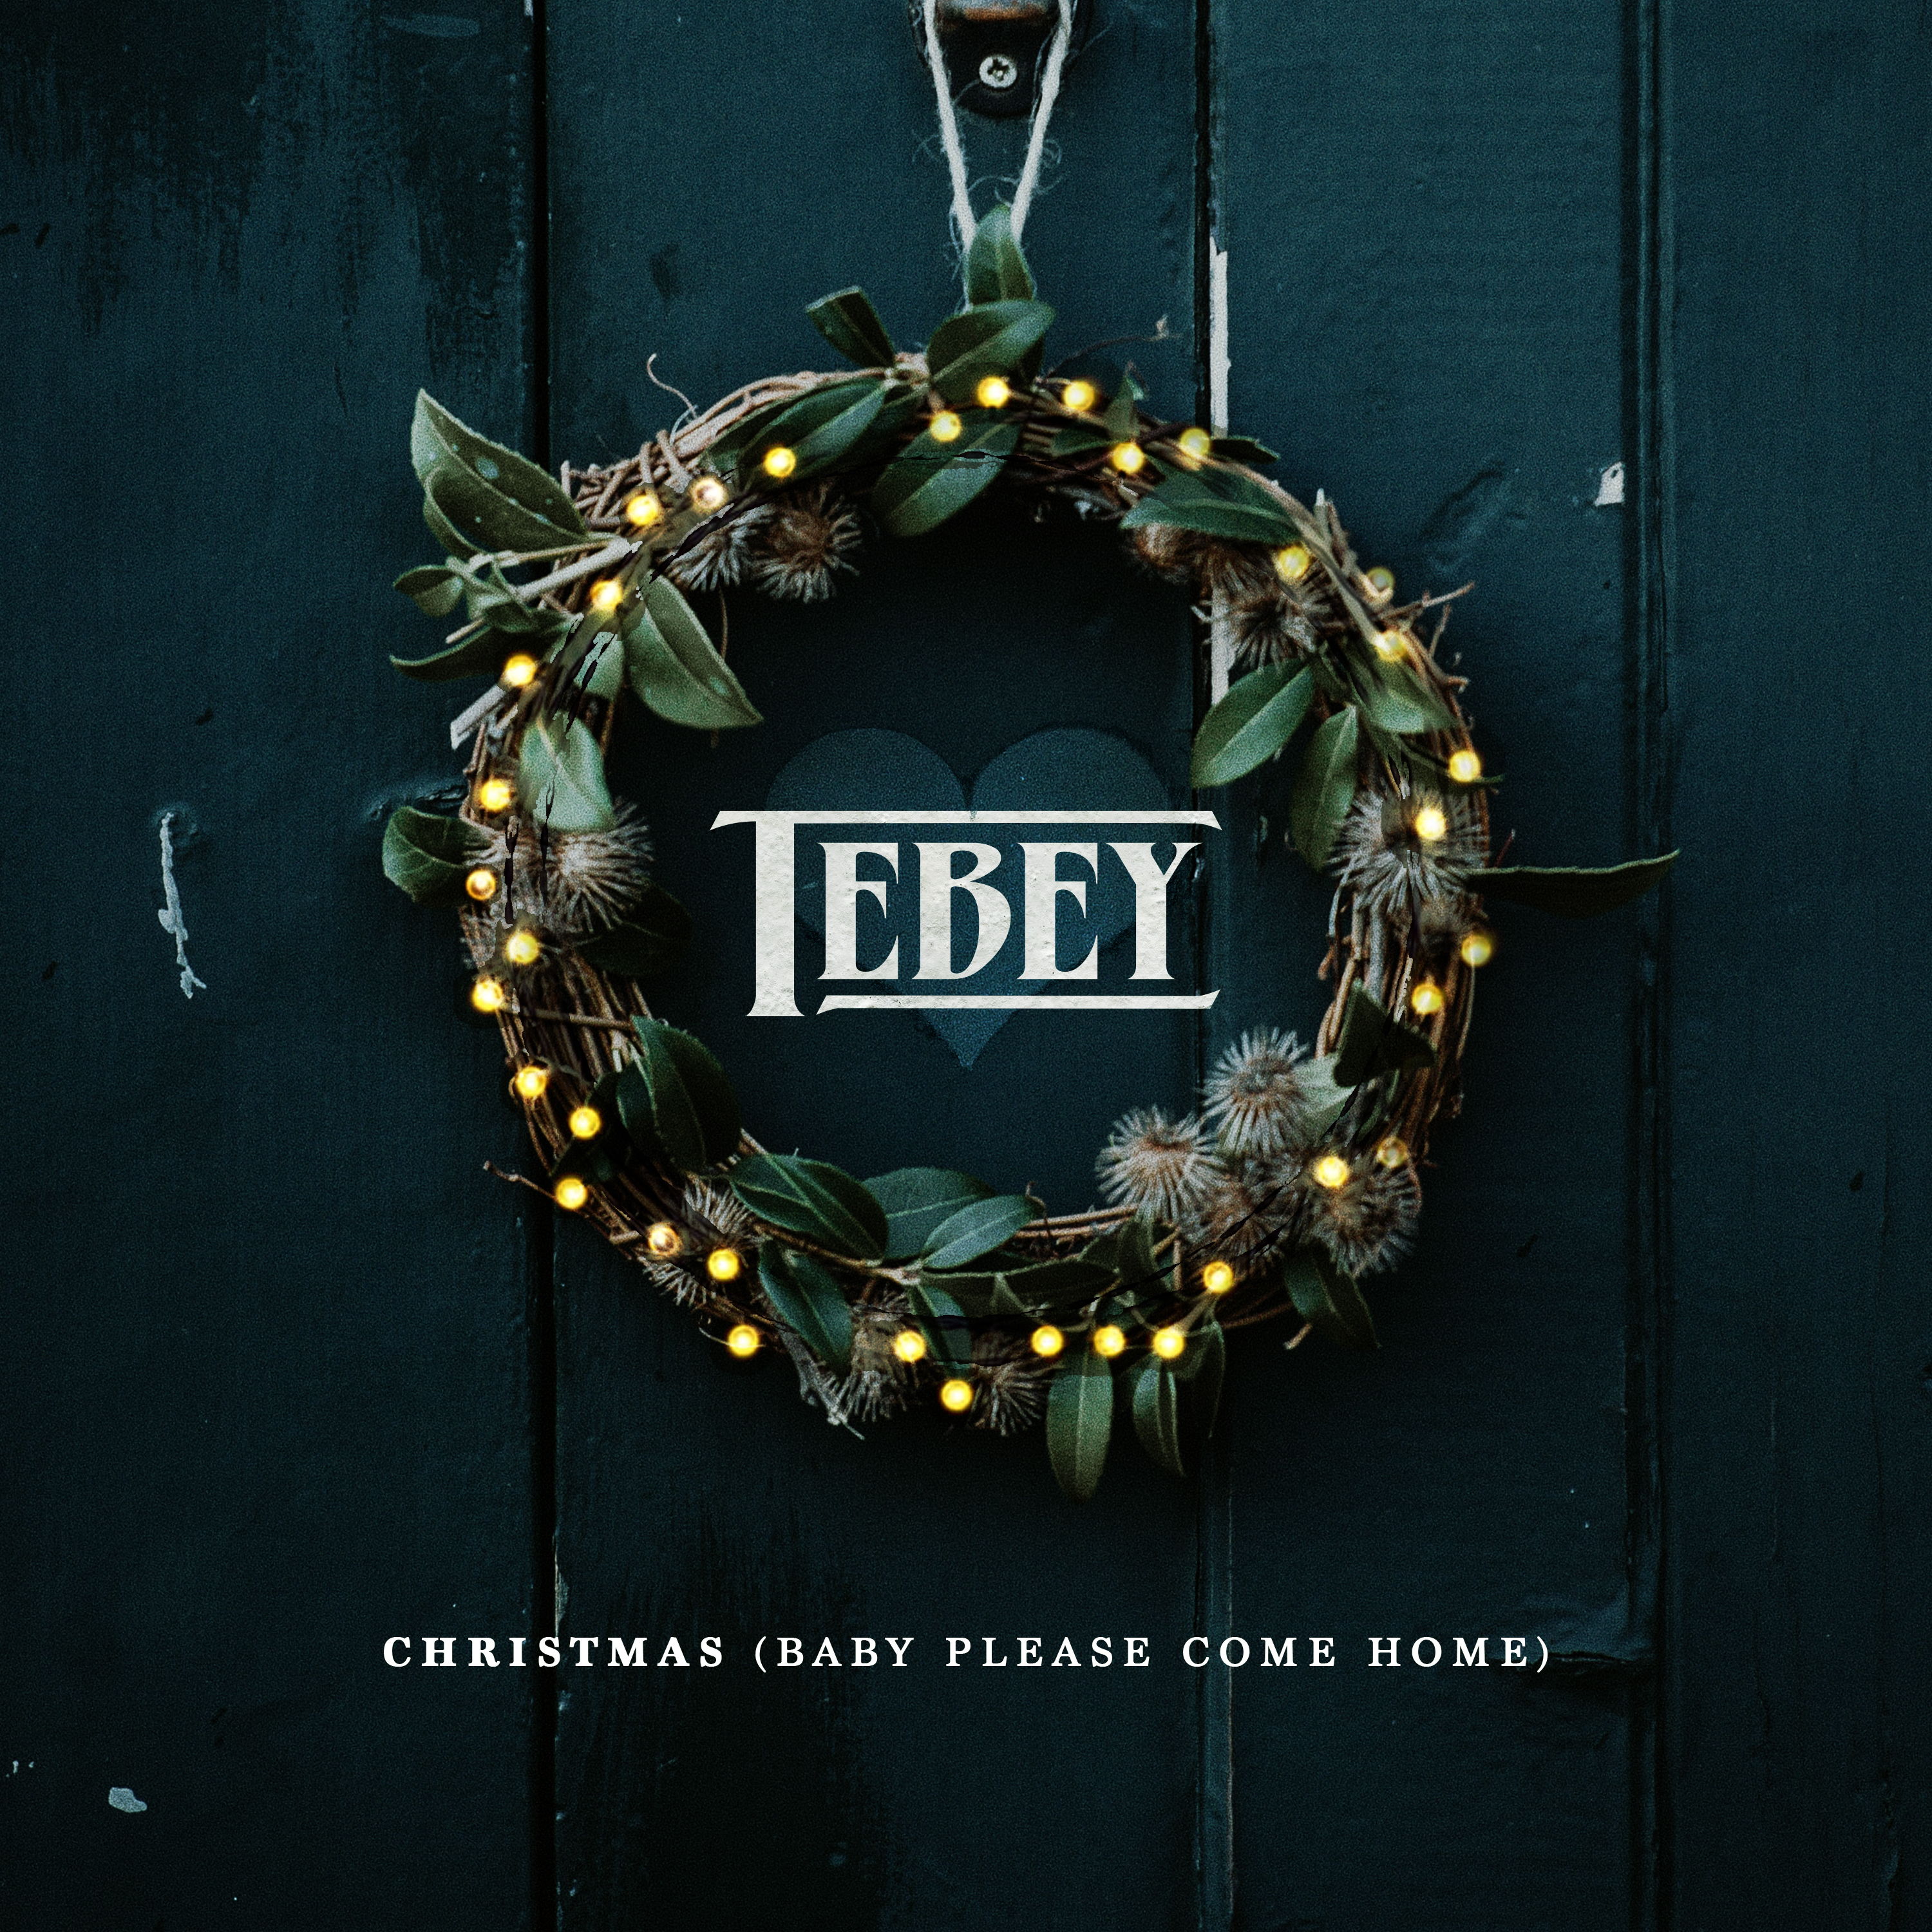 Platinum Selling Singer-Songwriter Tebey Releases Music Video for “Christmas (Baby Please Come Home)”